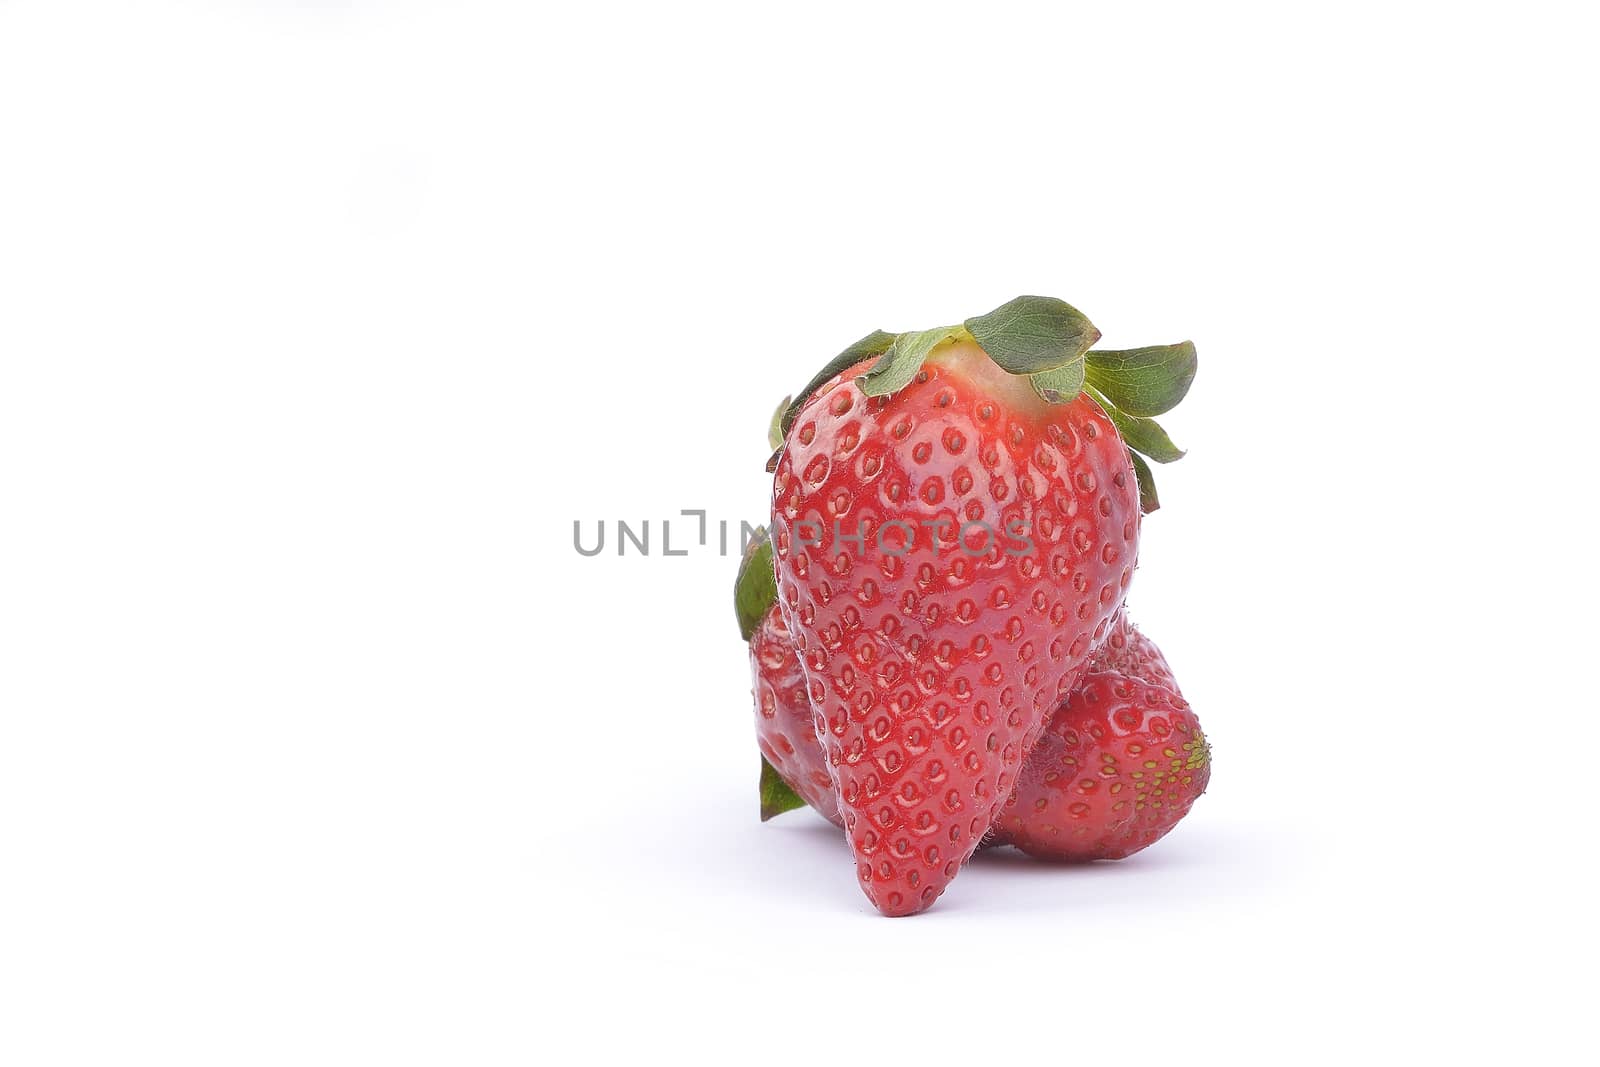 fresh raw strawberries  over white background by constantinhurghea